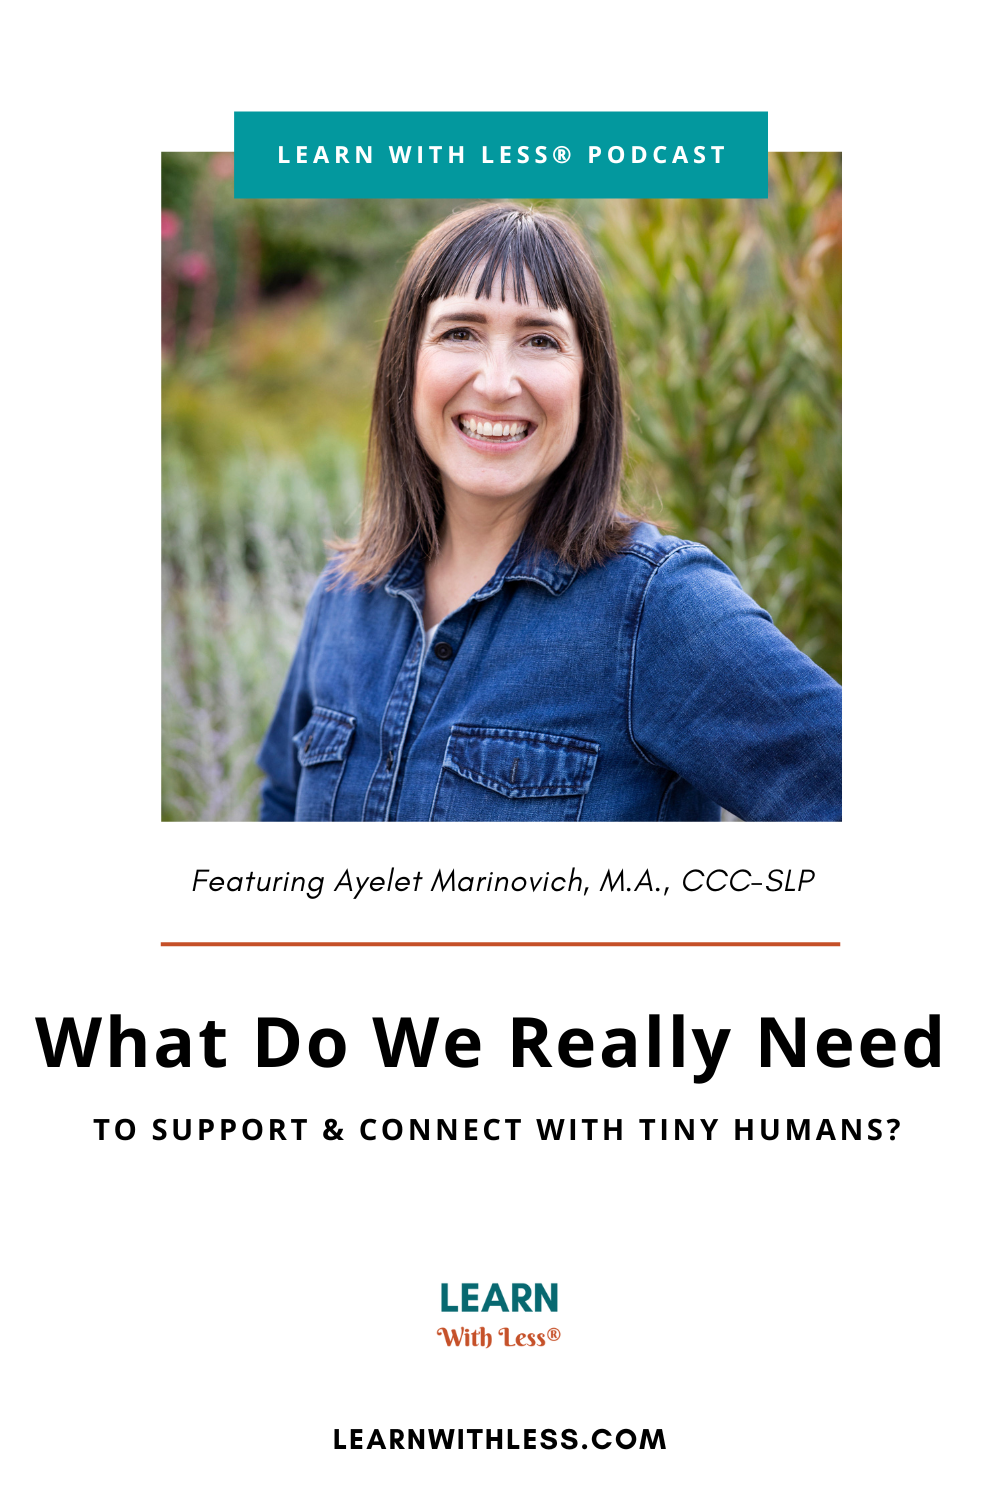 What Do We Really Need to Support & Connect With Tiny Humans?